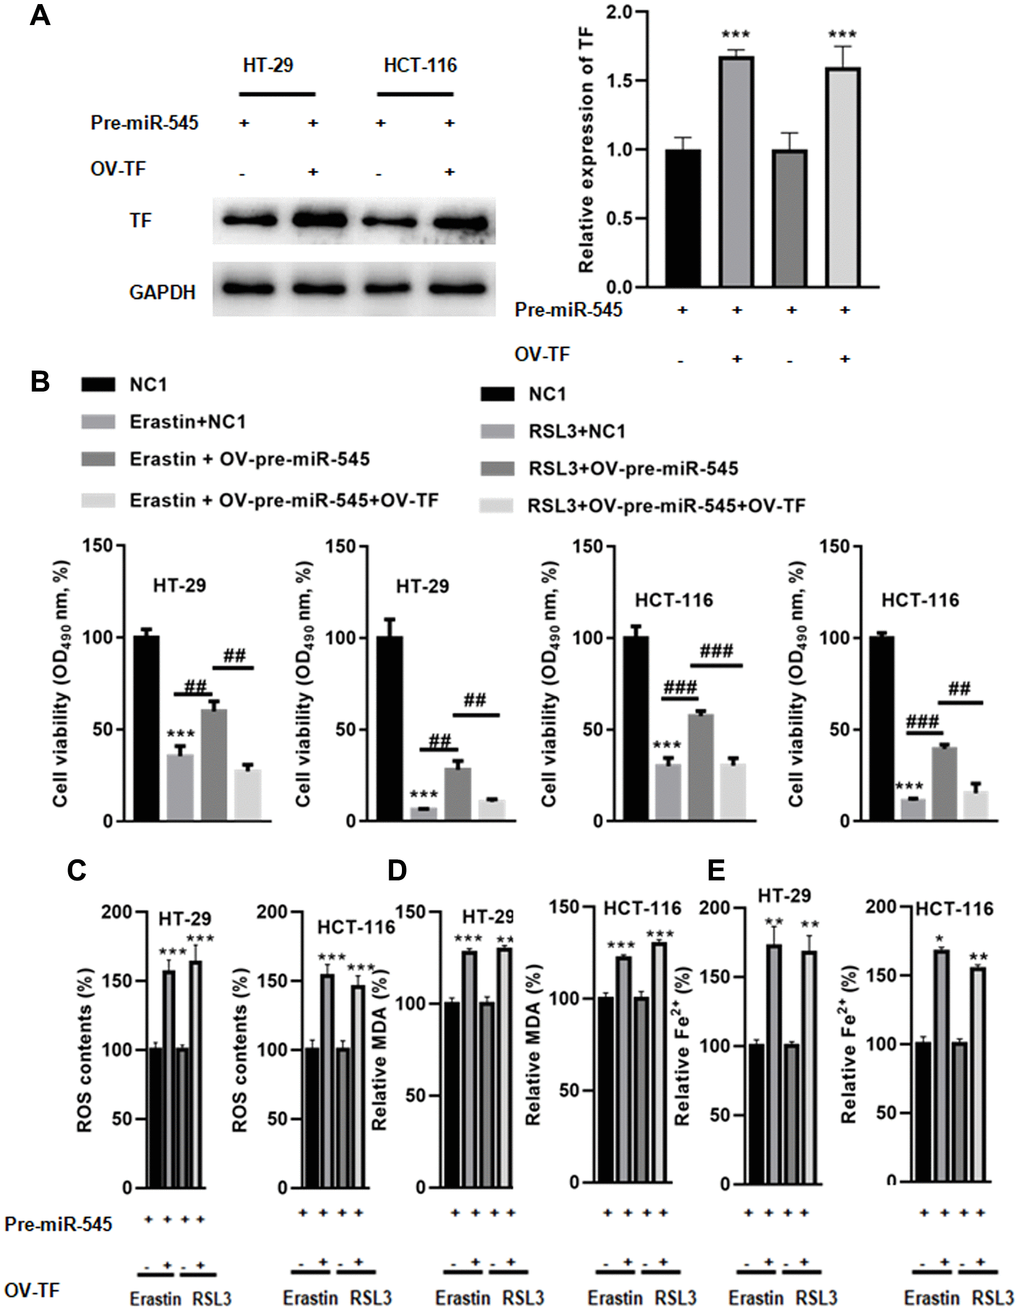 Overexpression of TF abolished miR-545-induced downregulation of lipid oxidation and iron accumulation. (A) Transfection with OV-TF significantly increased TF expression in HT-29 and HCT-116 cells in the presence of OV-pre-miR-545. (B) A CCK-8 assay showed that overexpression of TF further augmented erastin and RSL3-induced reduction of cell survival in HT-29 and HCT-116 cells. (C) TF also decreased ROS content in HT-29 and HCT-116 cells treated with erastin and RSL3. (D) MDA levels were also reduced in HT-29 and HCT-116 cells transfected with OV-TF. (E) Fe2+ levels decreased when TF was overexpressed in HT-29 and HCT-116 cells. *p **p ***p 